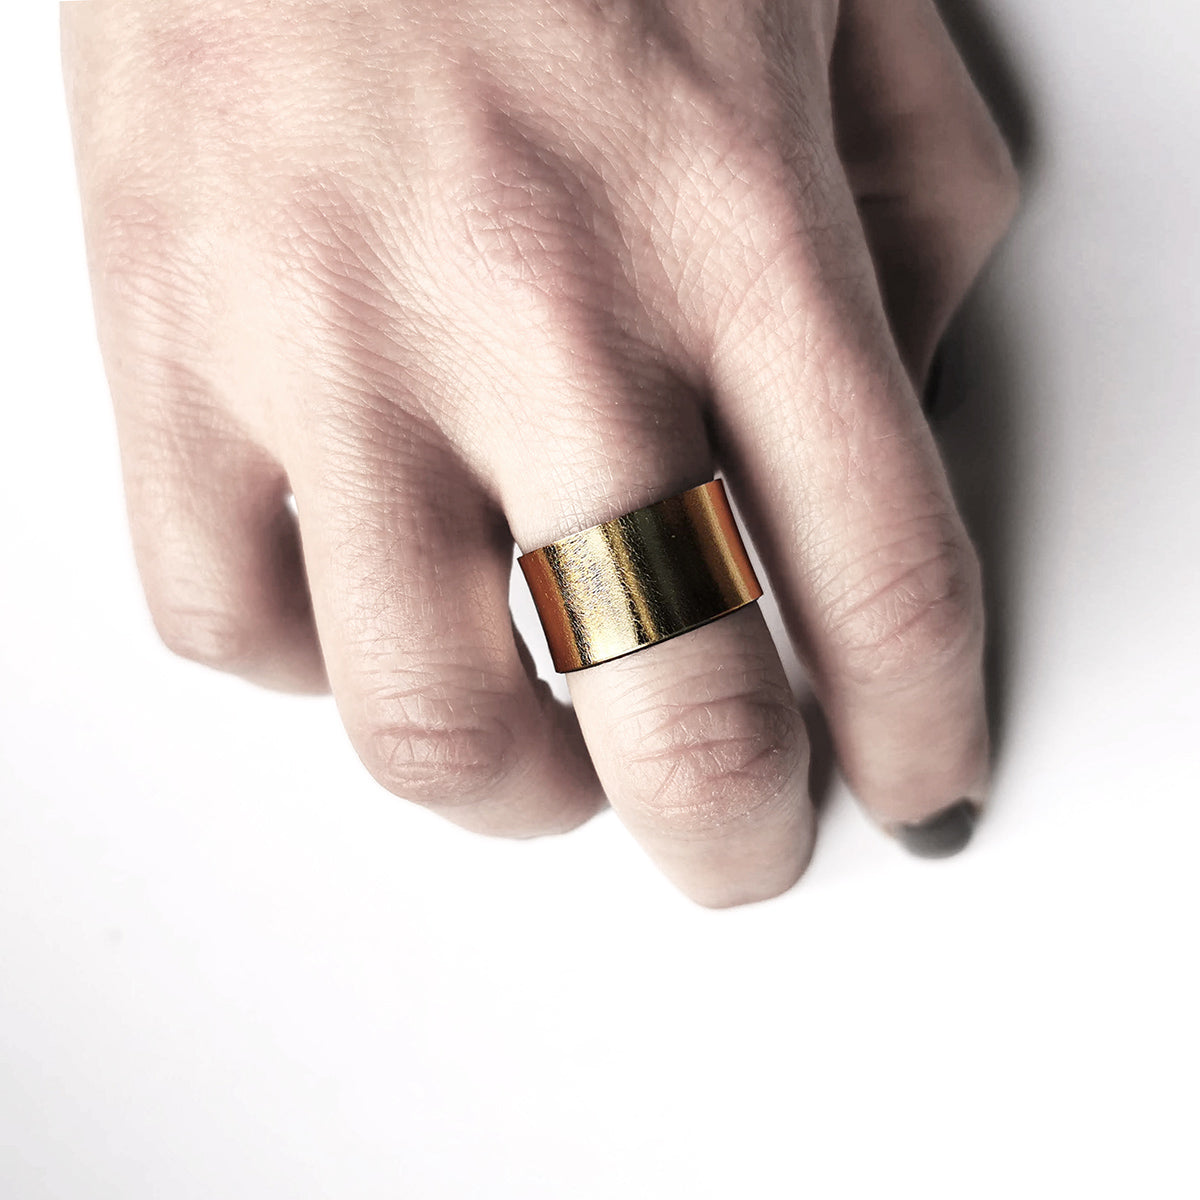 shiny gold leather ring by angela pinto